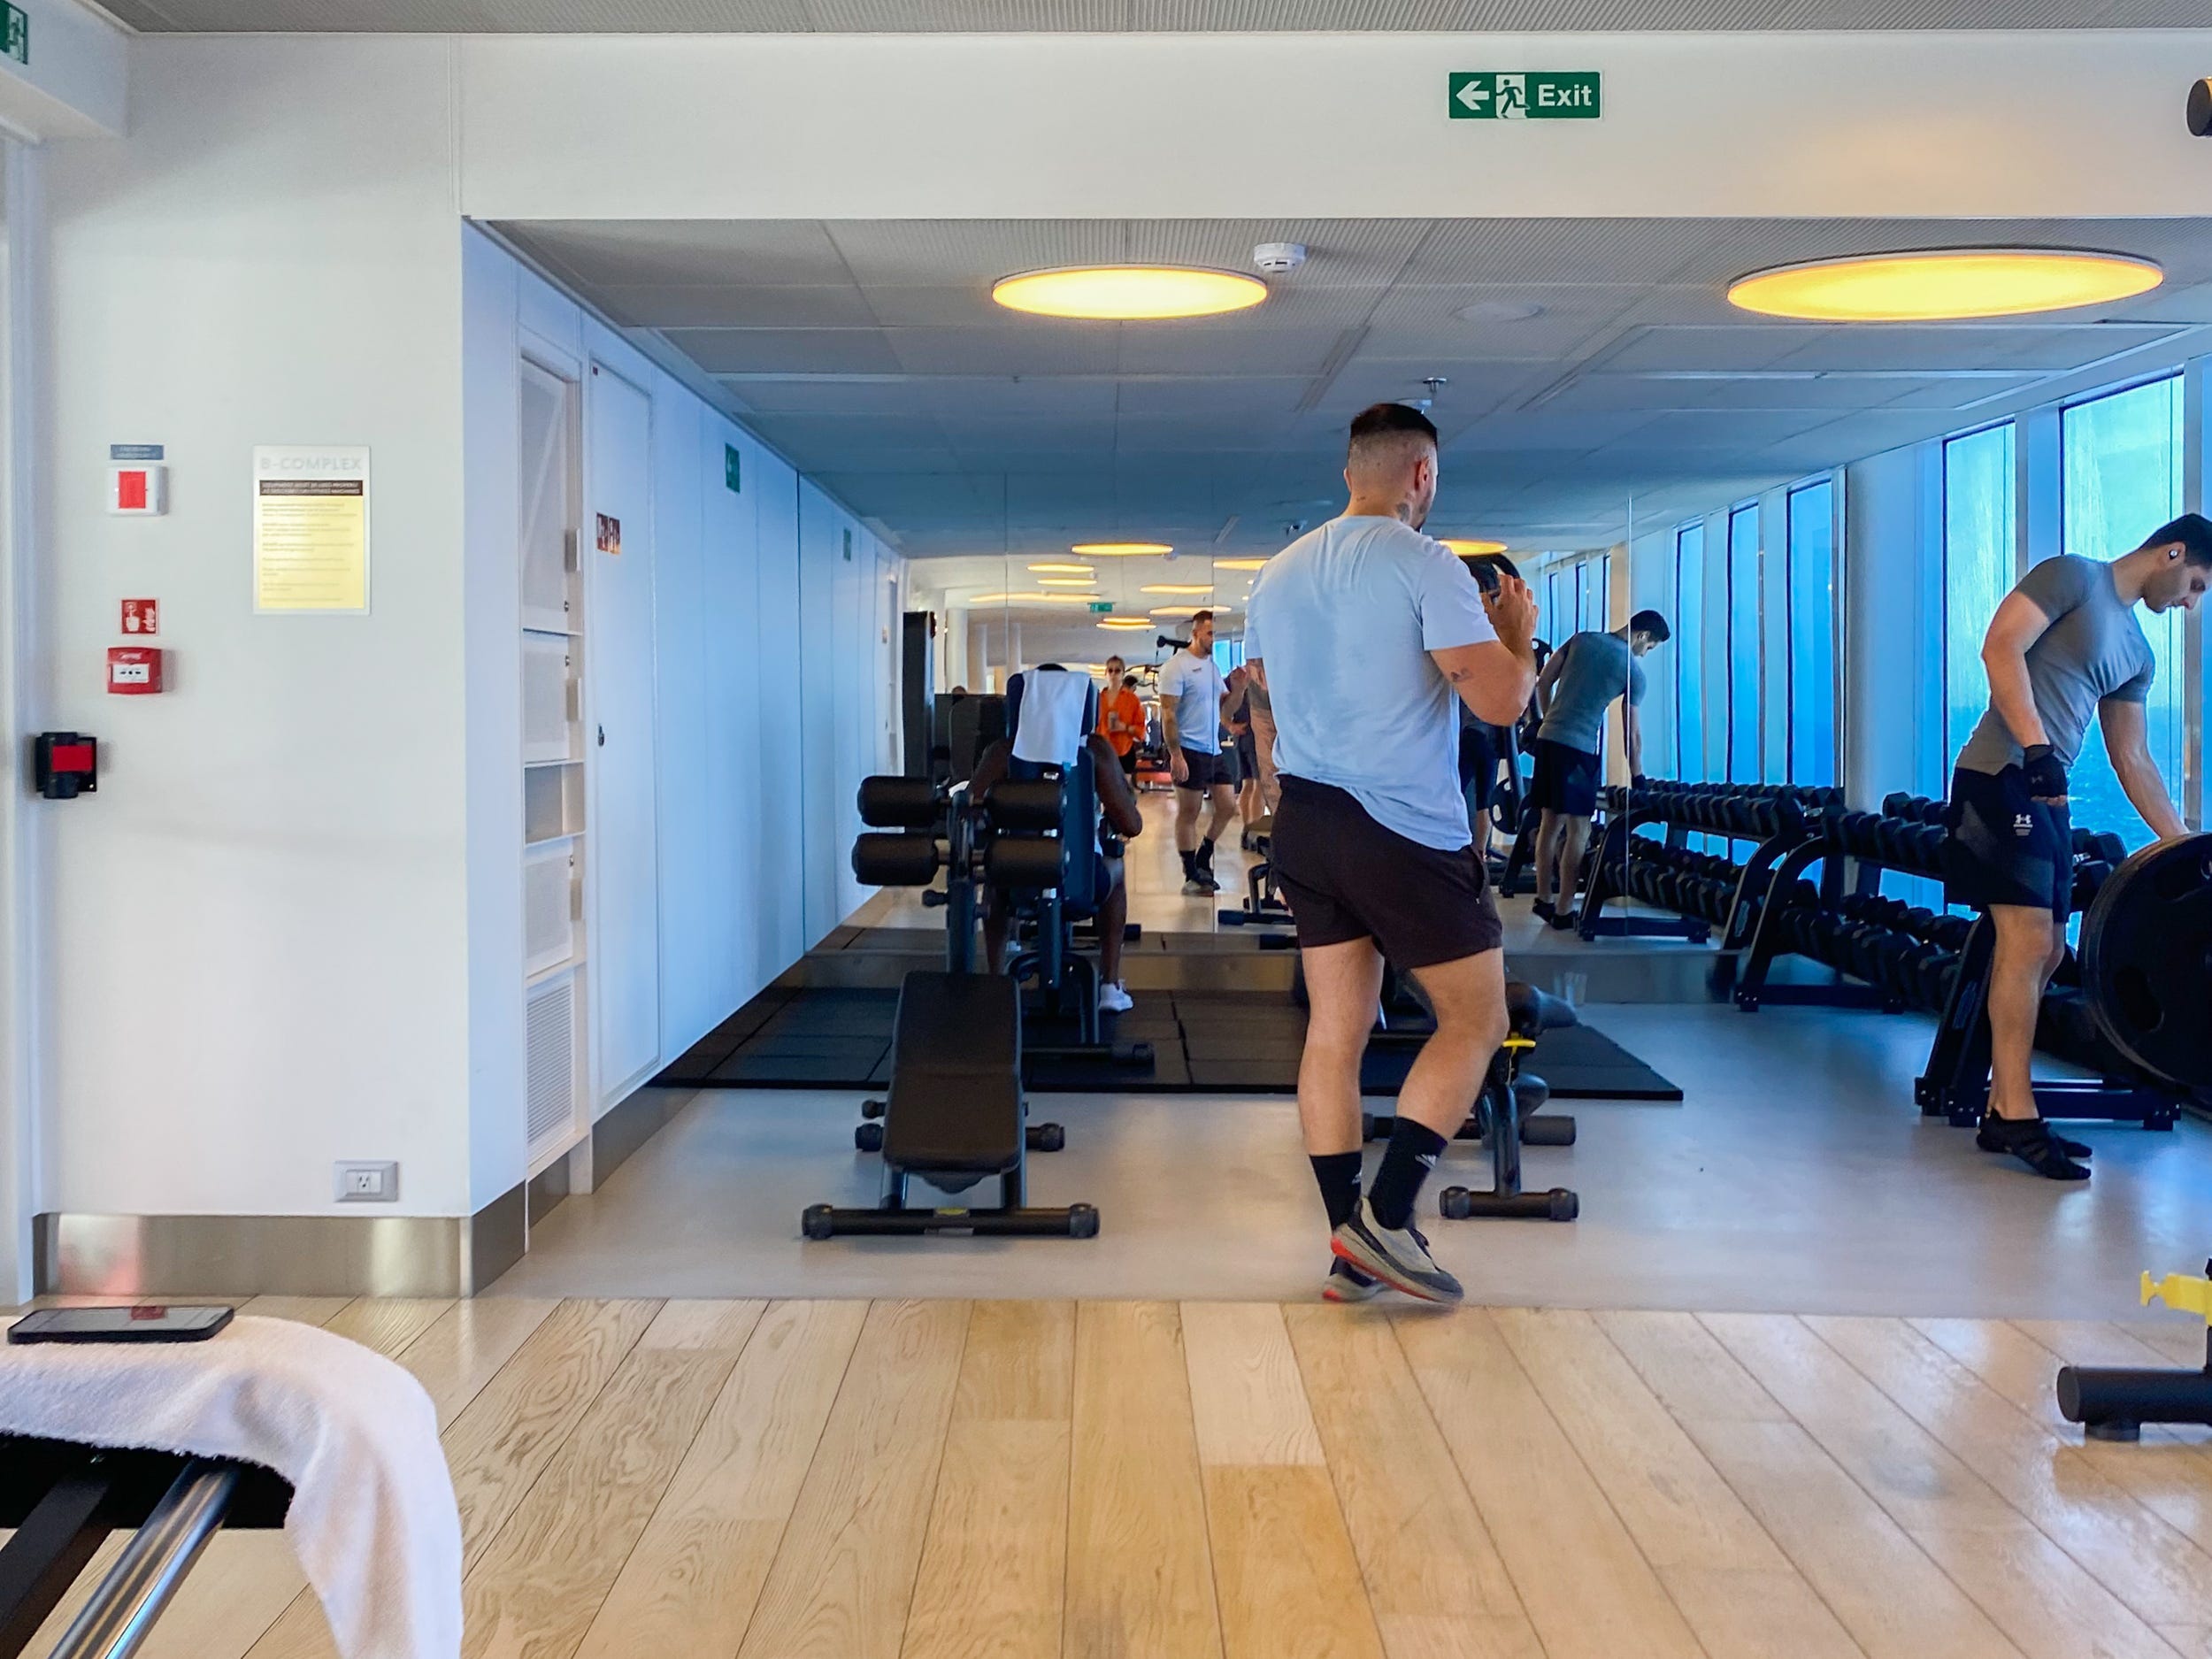 <p>B-Complex is the gym onboard Virgin cruise ships. They have free weights and machines as well as fitness classes from yoga to spin sessions. </p><p>I don't like to work out on vacation unless it's a fun activity that makes me forget I'm exercising at all. So I didn't use the gym. But I thought B-Complex's offerings were consistent with gyms I've been to at home while offering a much better view — the ocean.</p>